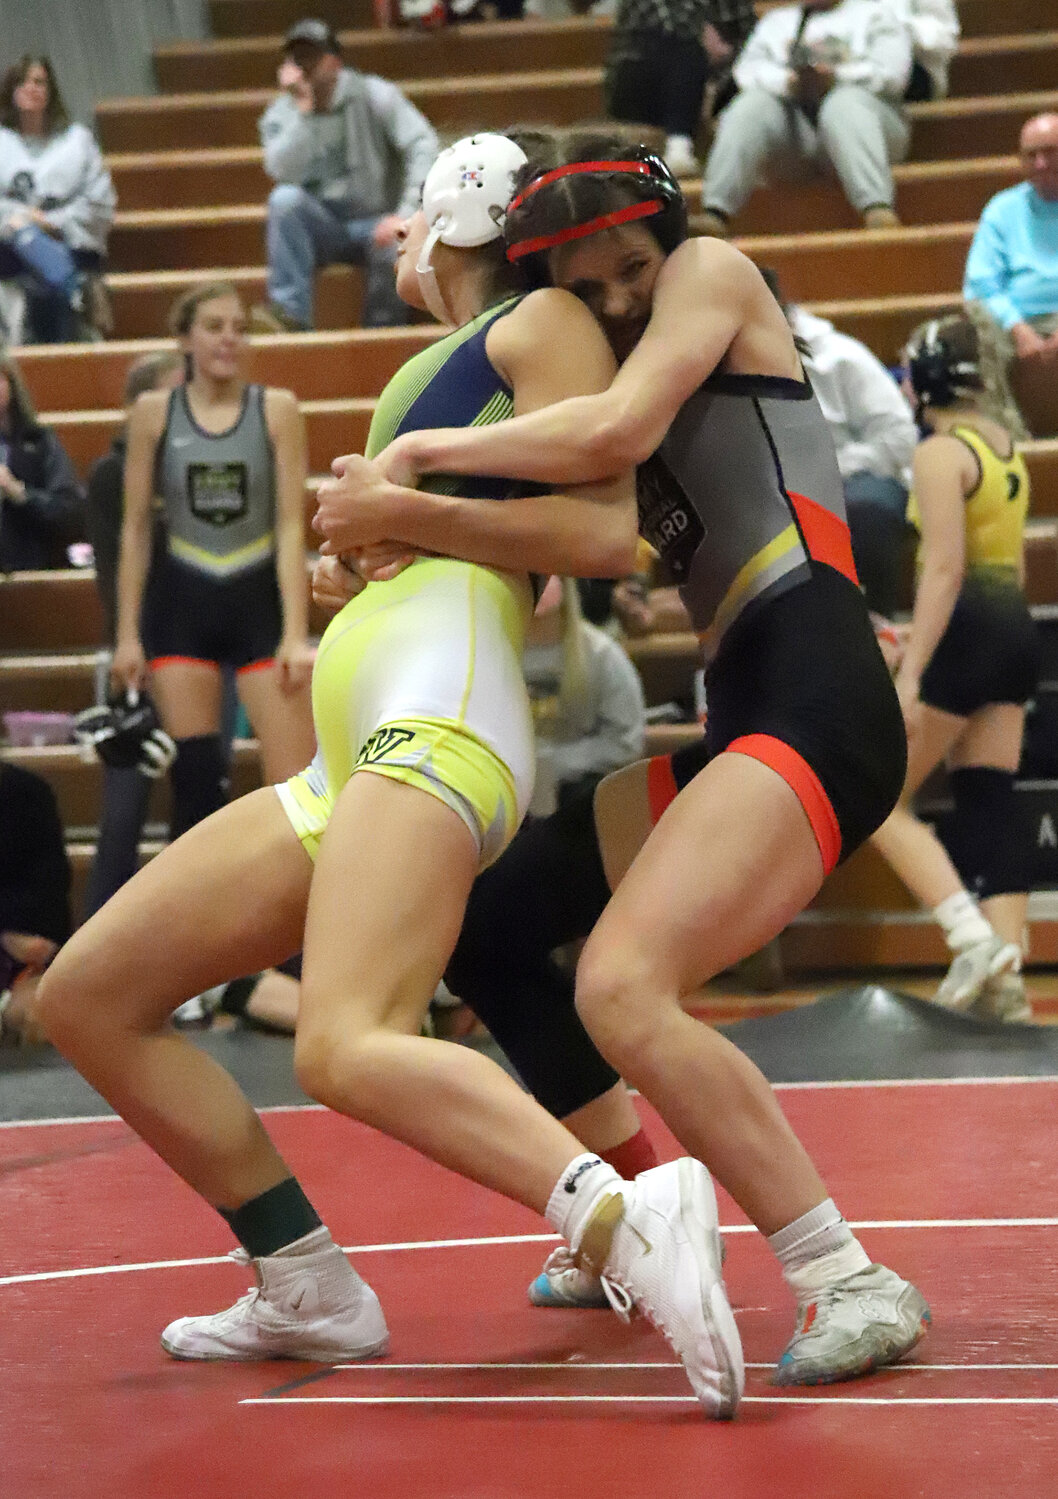 Sophomore Mara Smith tries to pull down Anna Gorsch from behind in the title match at 125 lbs. Smith would win and remains perfect on the season.